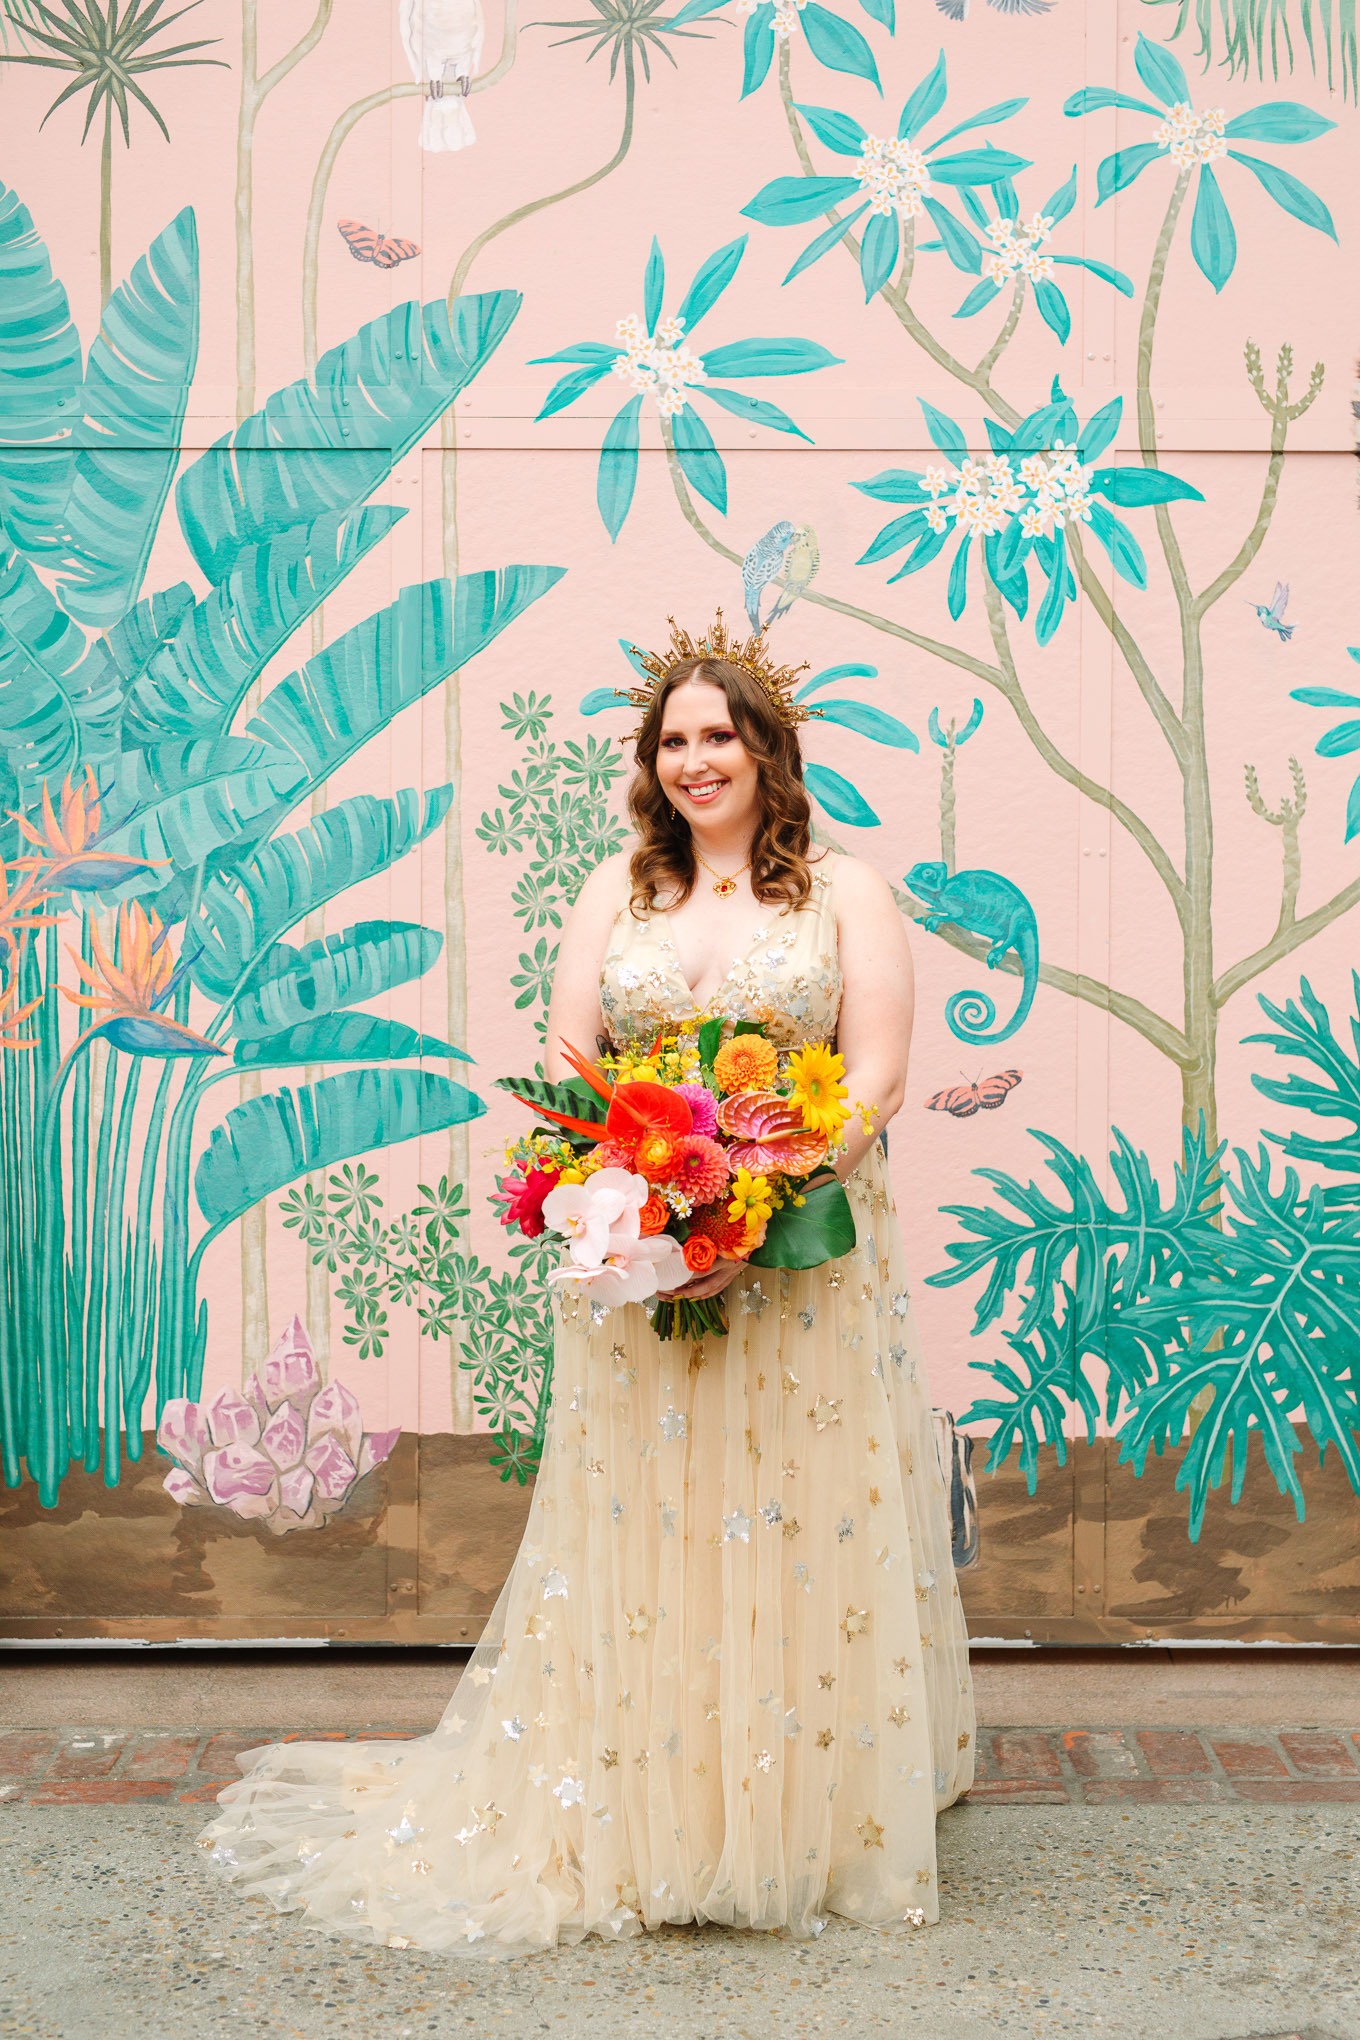 Bride with colorful tropical bouquet standing in front of mural | Colorful Downtown Los Angeles Valentine Wedding | Los Angeles wedding photographer | #losangeleswedding #colorfulwedding #DTLA #valentinedtla   Source: Mary Costa Photography | Los Angeles